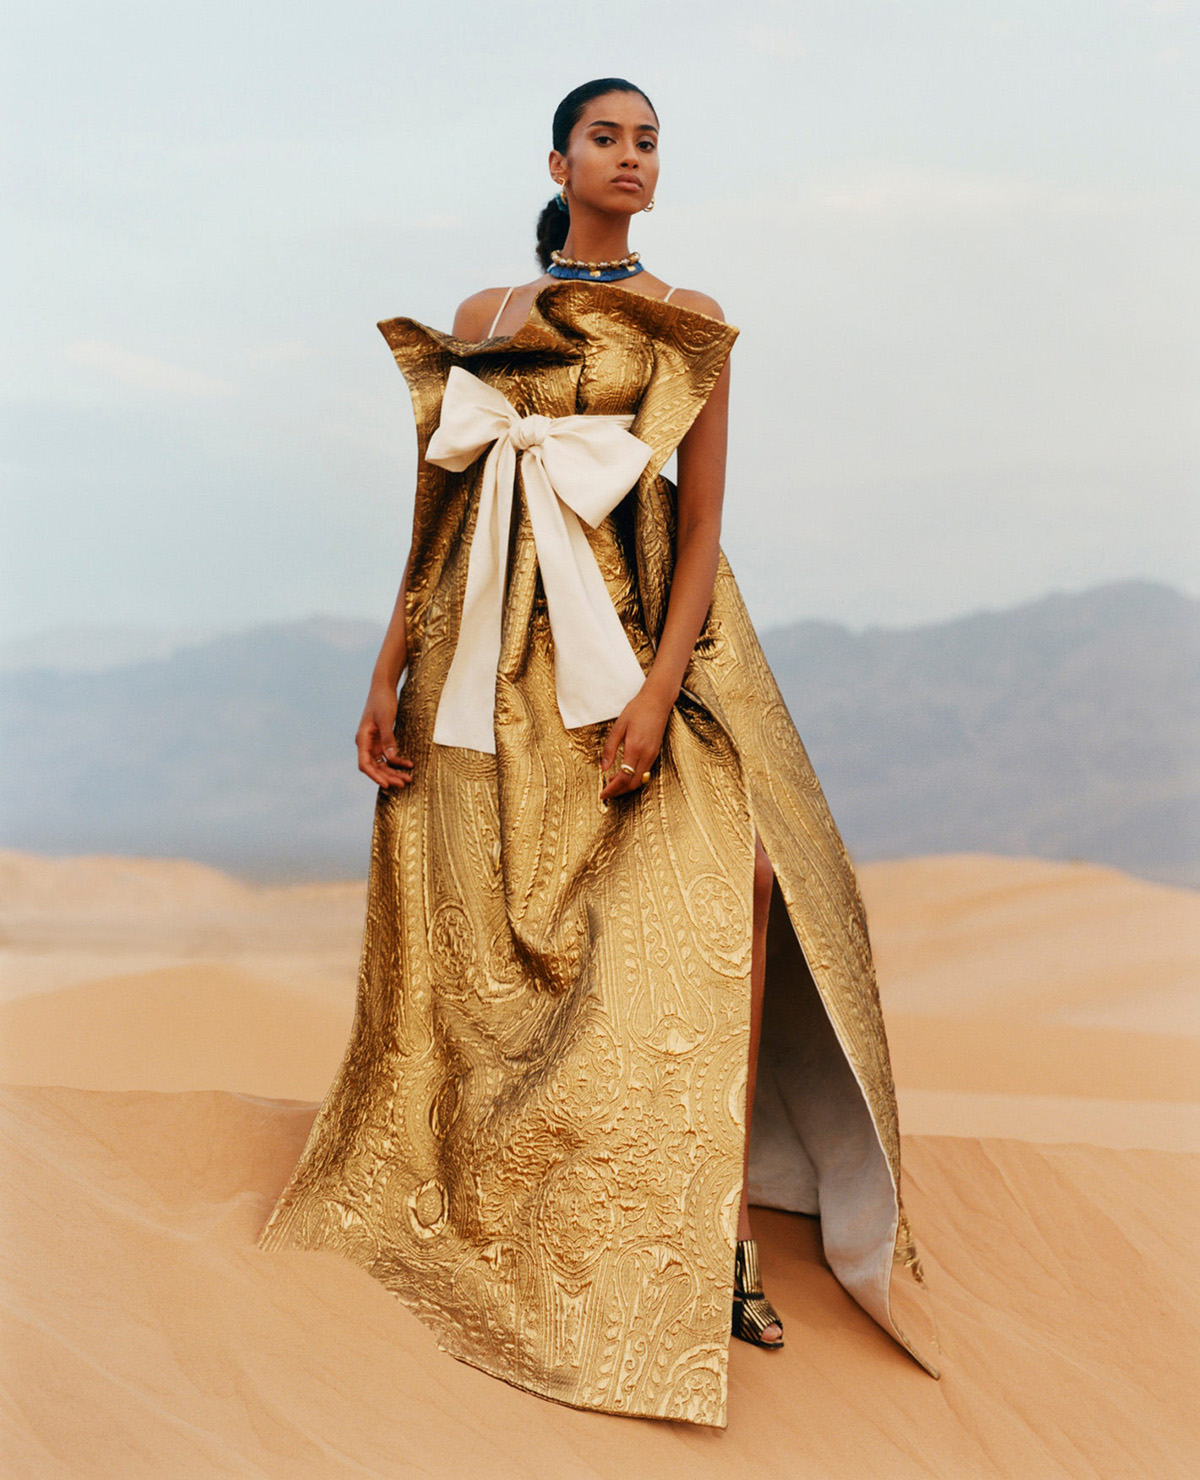 Imaan Hammam and He Cong by Eddie Wrey for Vogue Global January 2022